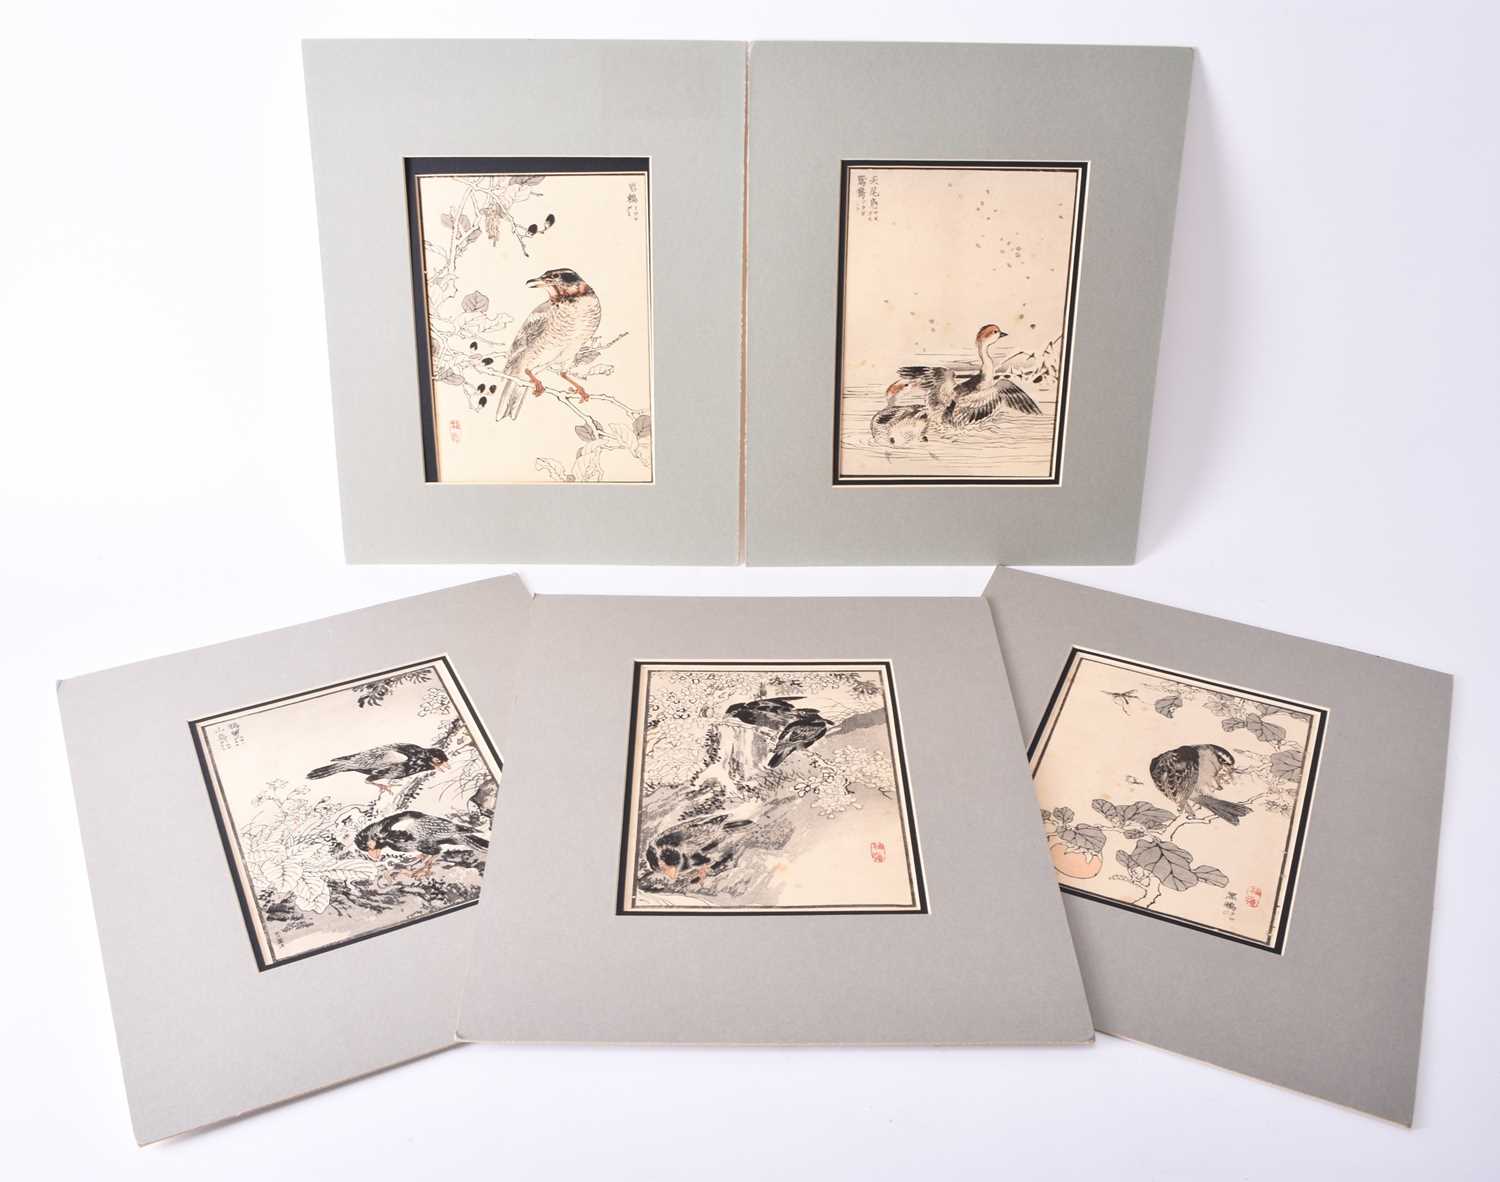 Utagawa Hiroshige and others, a collection of woodblock prints